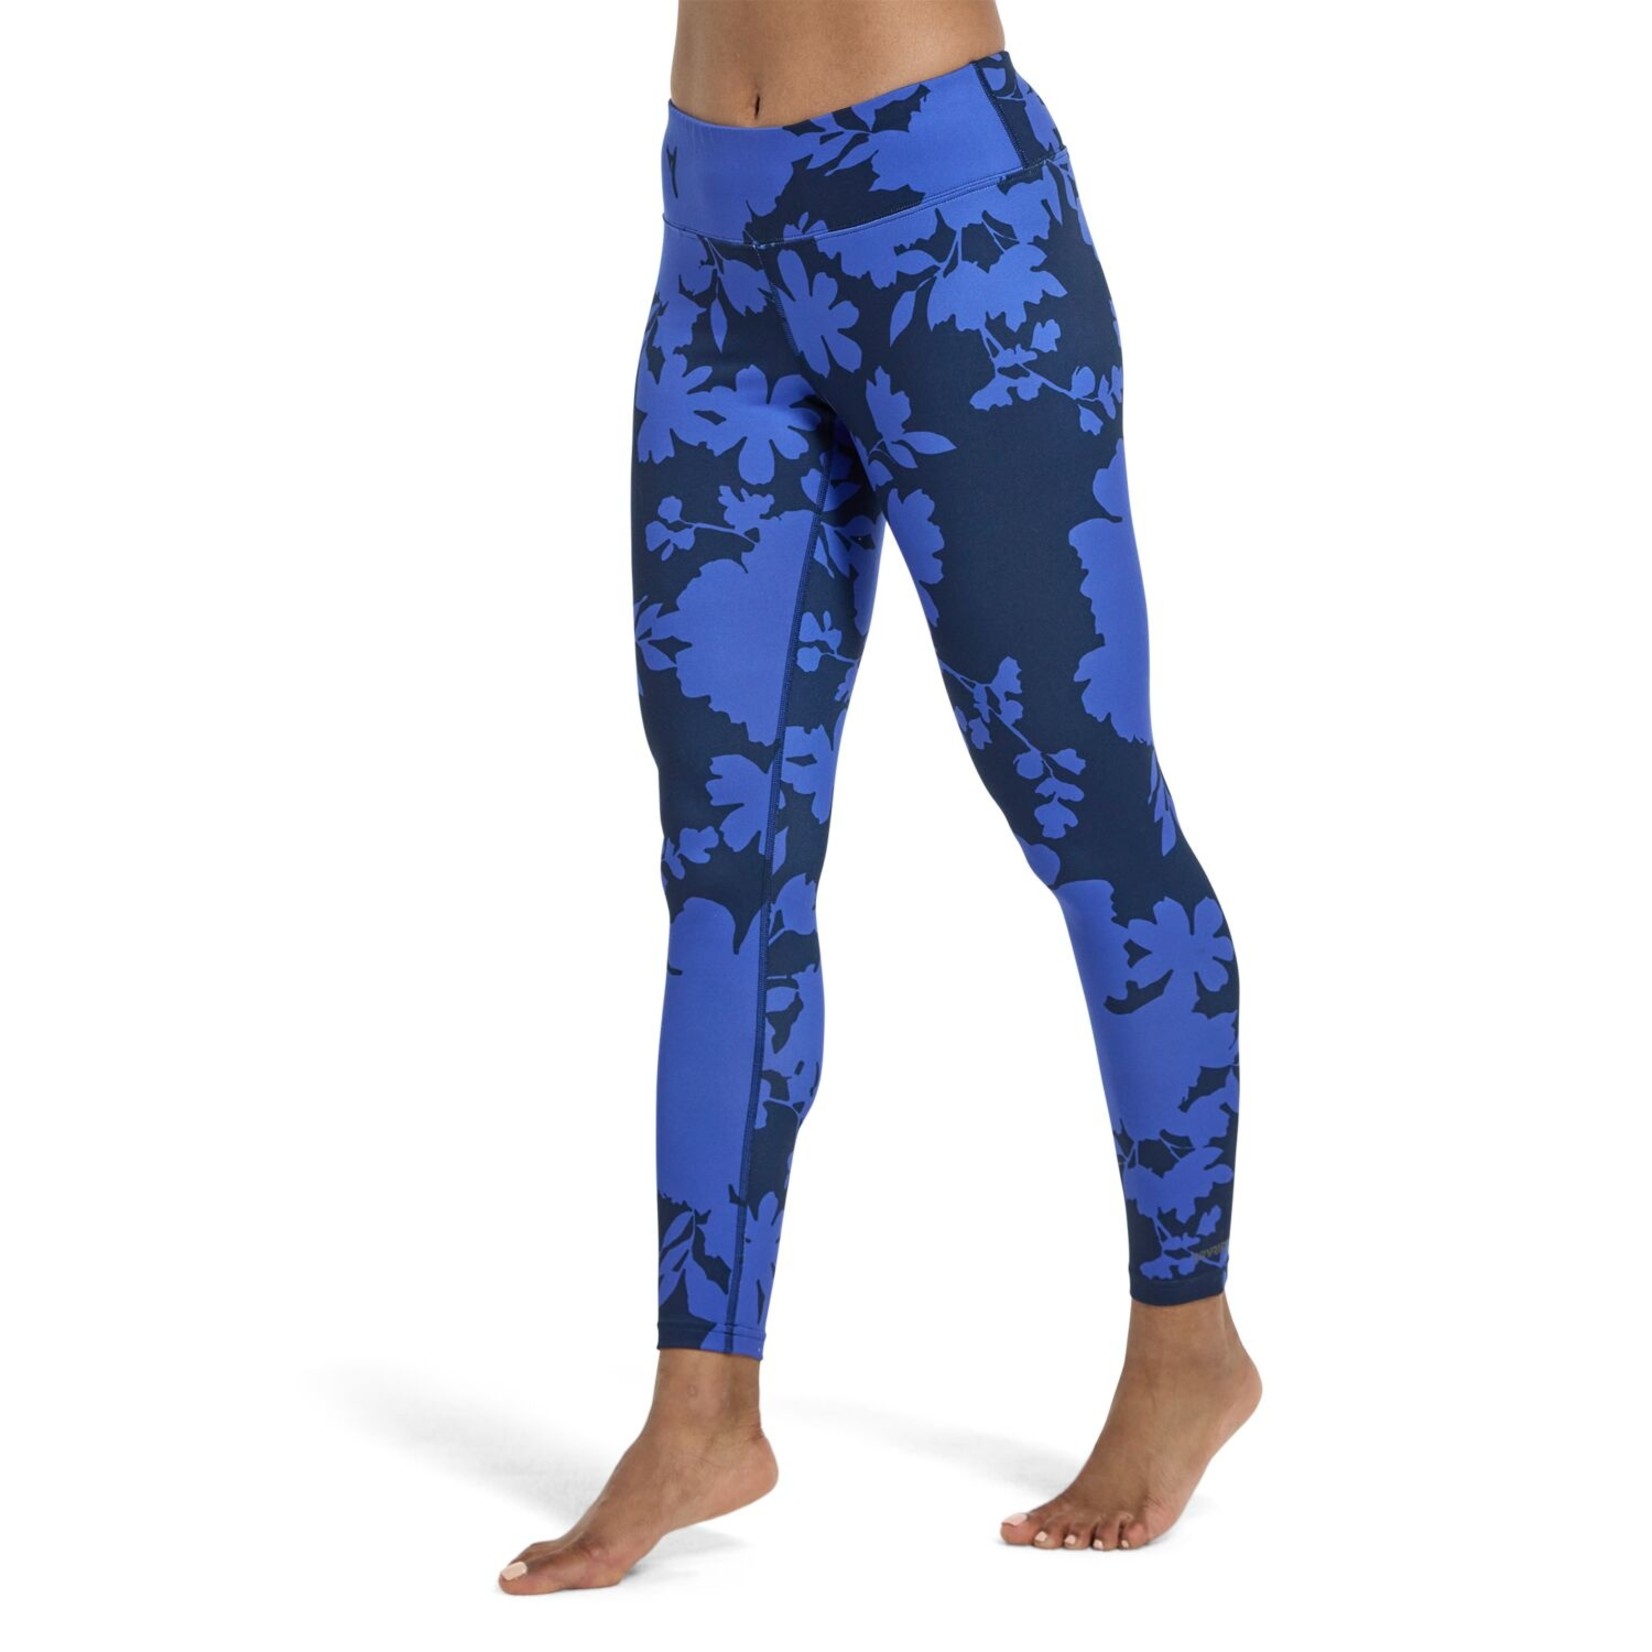 Women's Base Layer Mid-Weight Bottoms